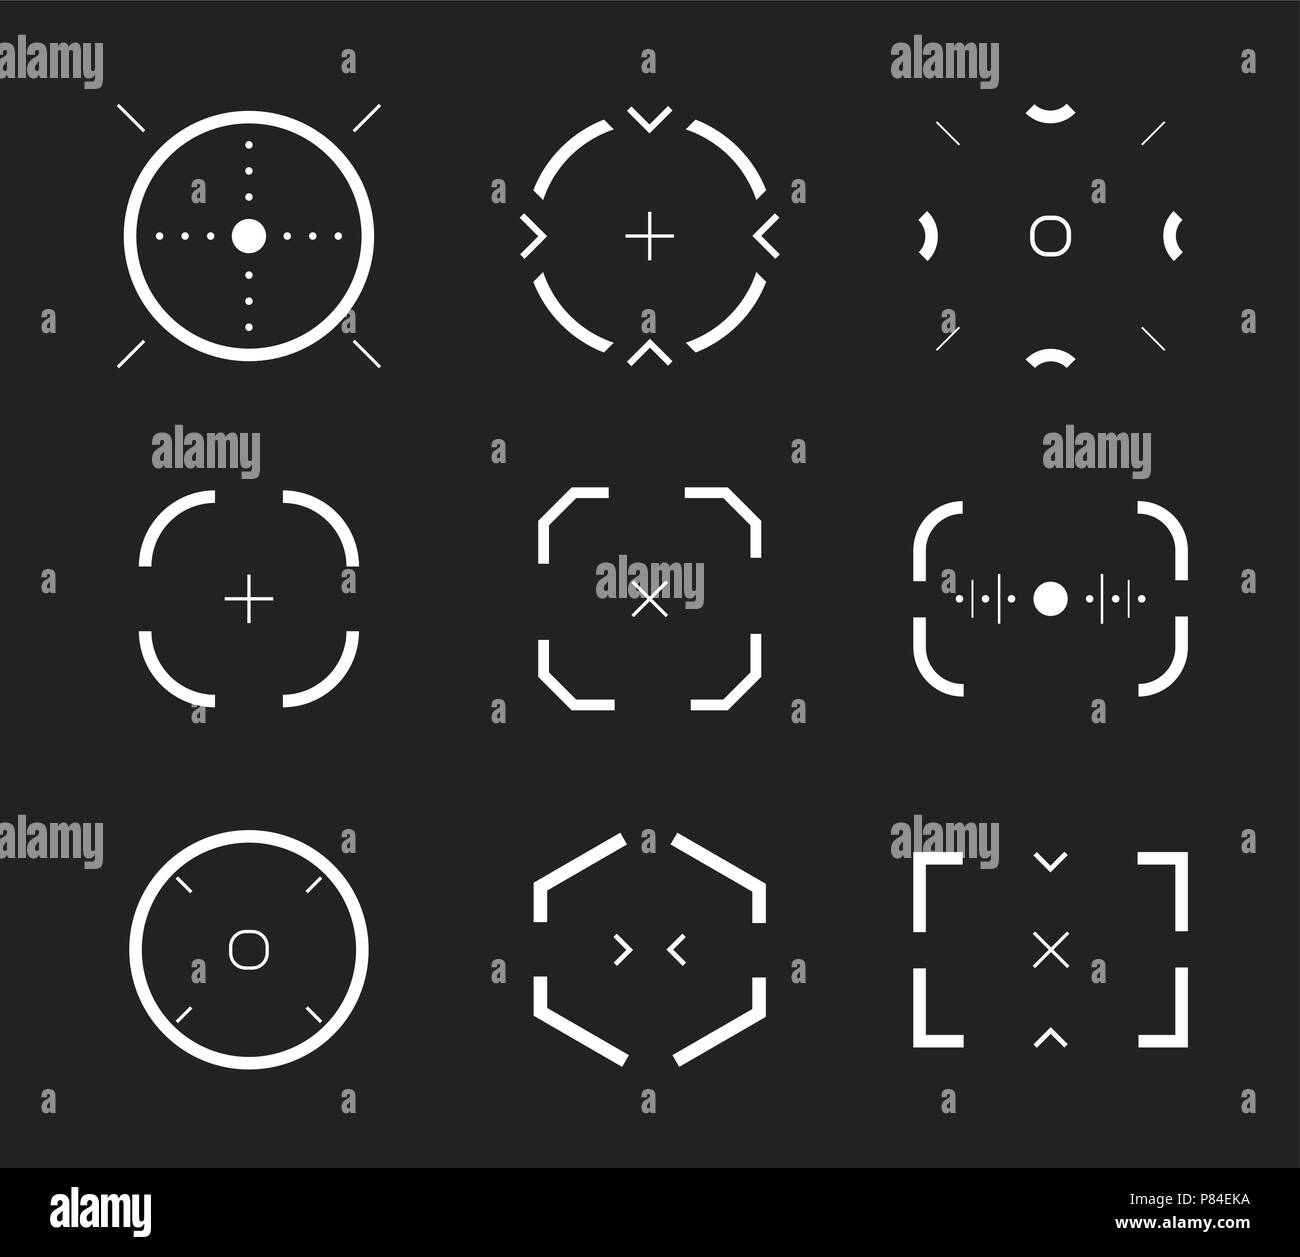 Sniper aim, bullseye, scope icons set, modern gamer collection. Shooting range, aim, target icon collection. Abstract design element, vector illustration on black background. Stock Vector